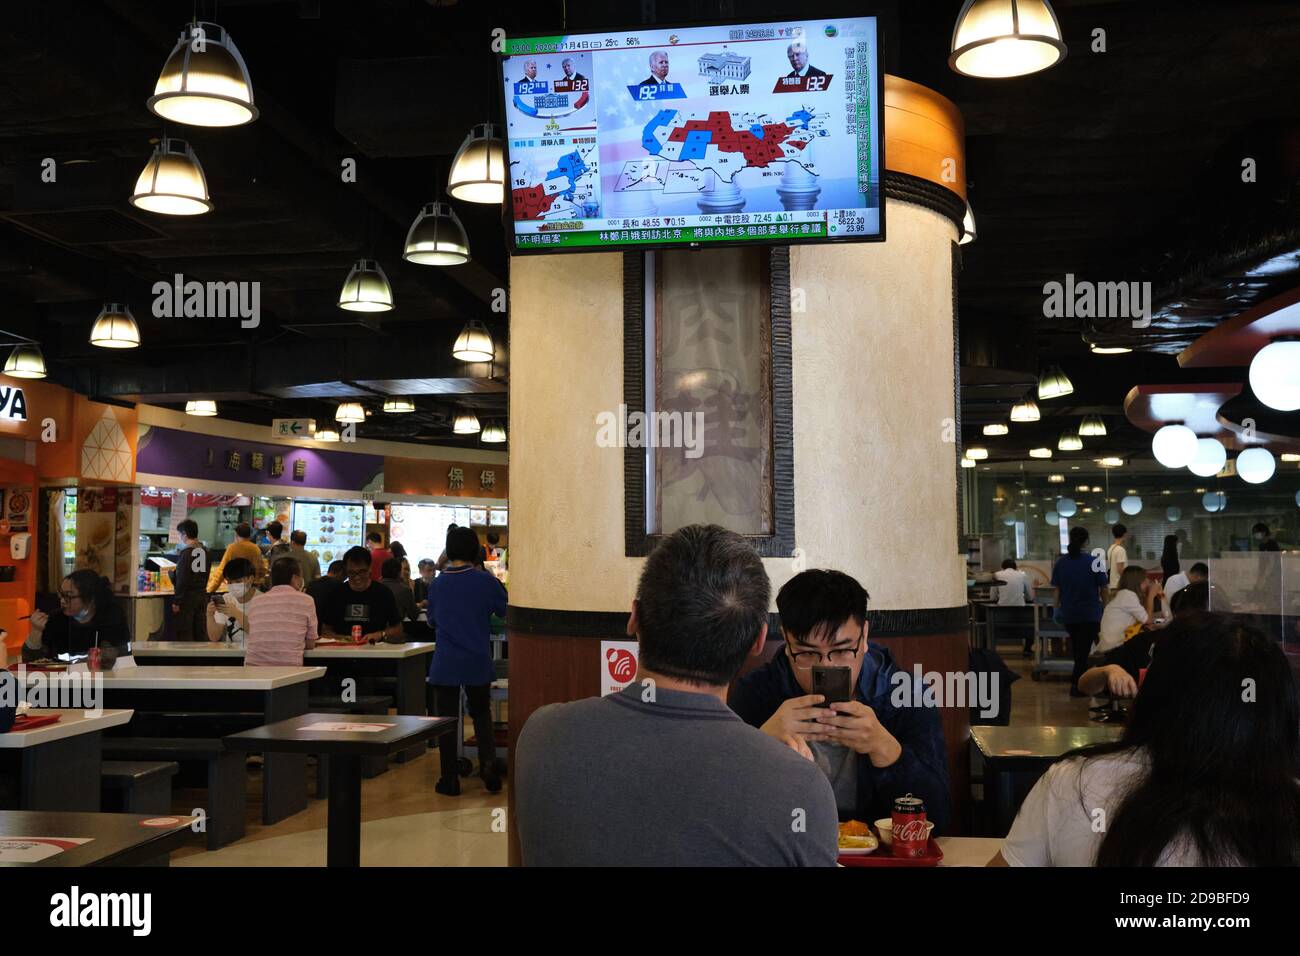 A man watches live news report of the US Presidential elections at a food court  in Hong Kong as U.S.'s future policies on Hong Kong may be affected. Stock Photo